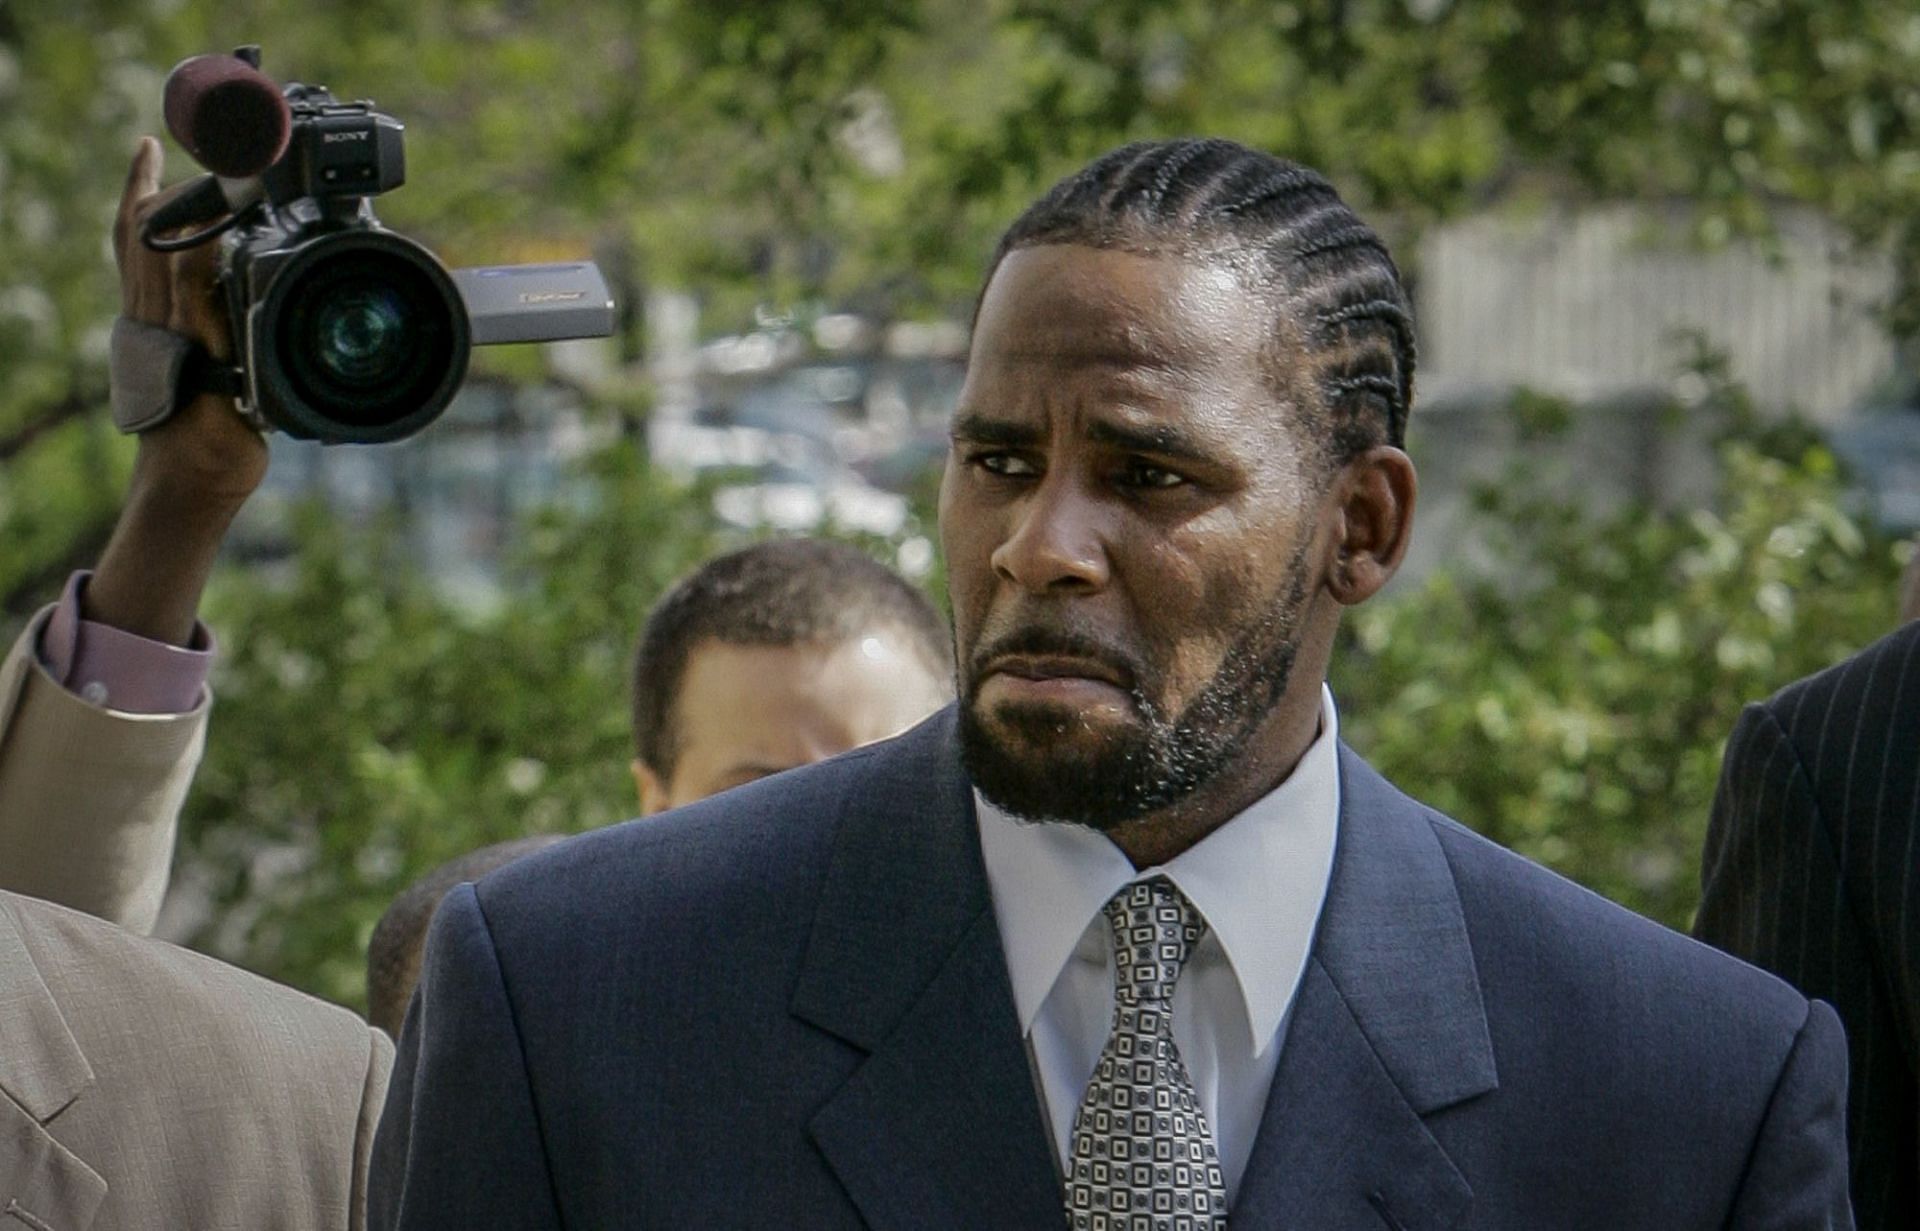 quot Mother needs some jail time too quot : R Kelly trial transcript text